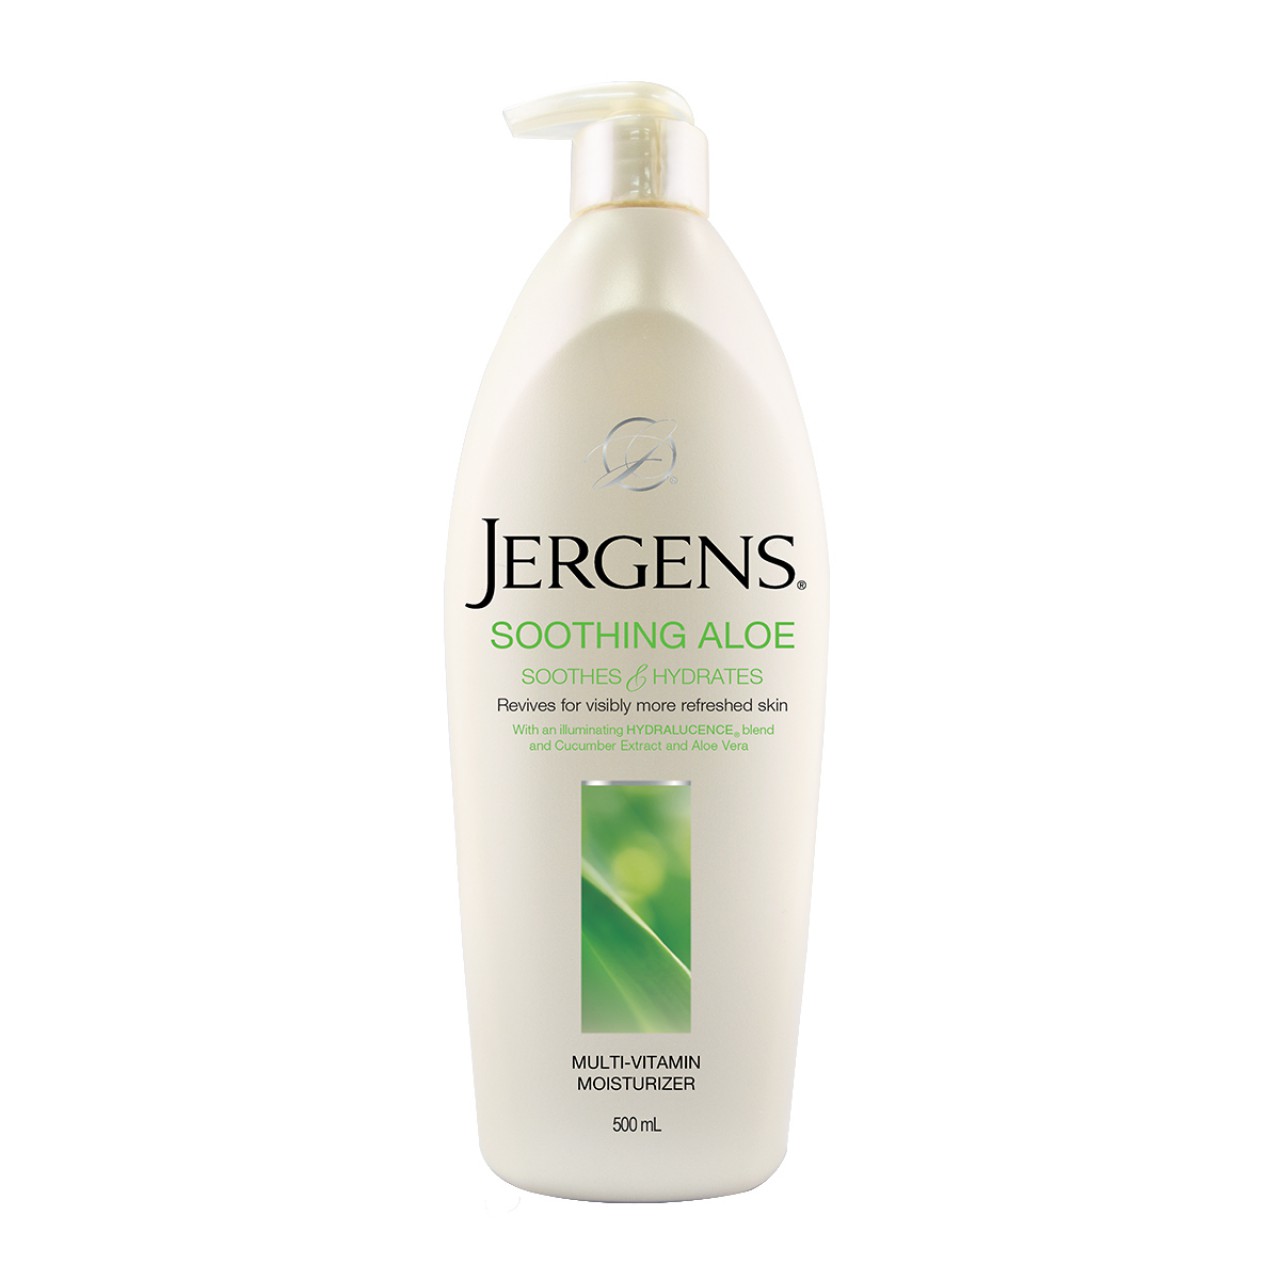 JERGENS MULTIVITAMIN MOISTURIZER LOTION (SOOTHES & HYDRATES) SOOTHING ALOE 500ML